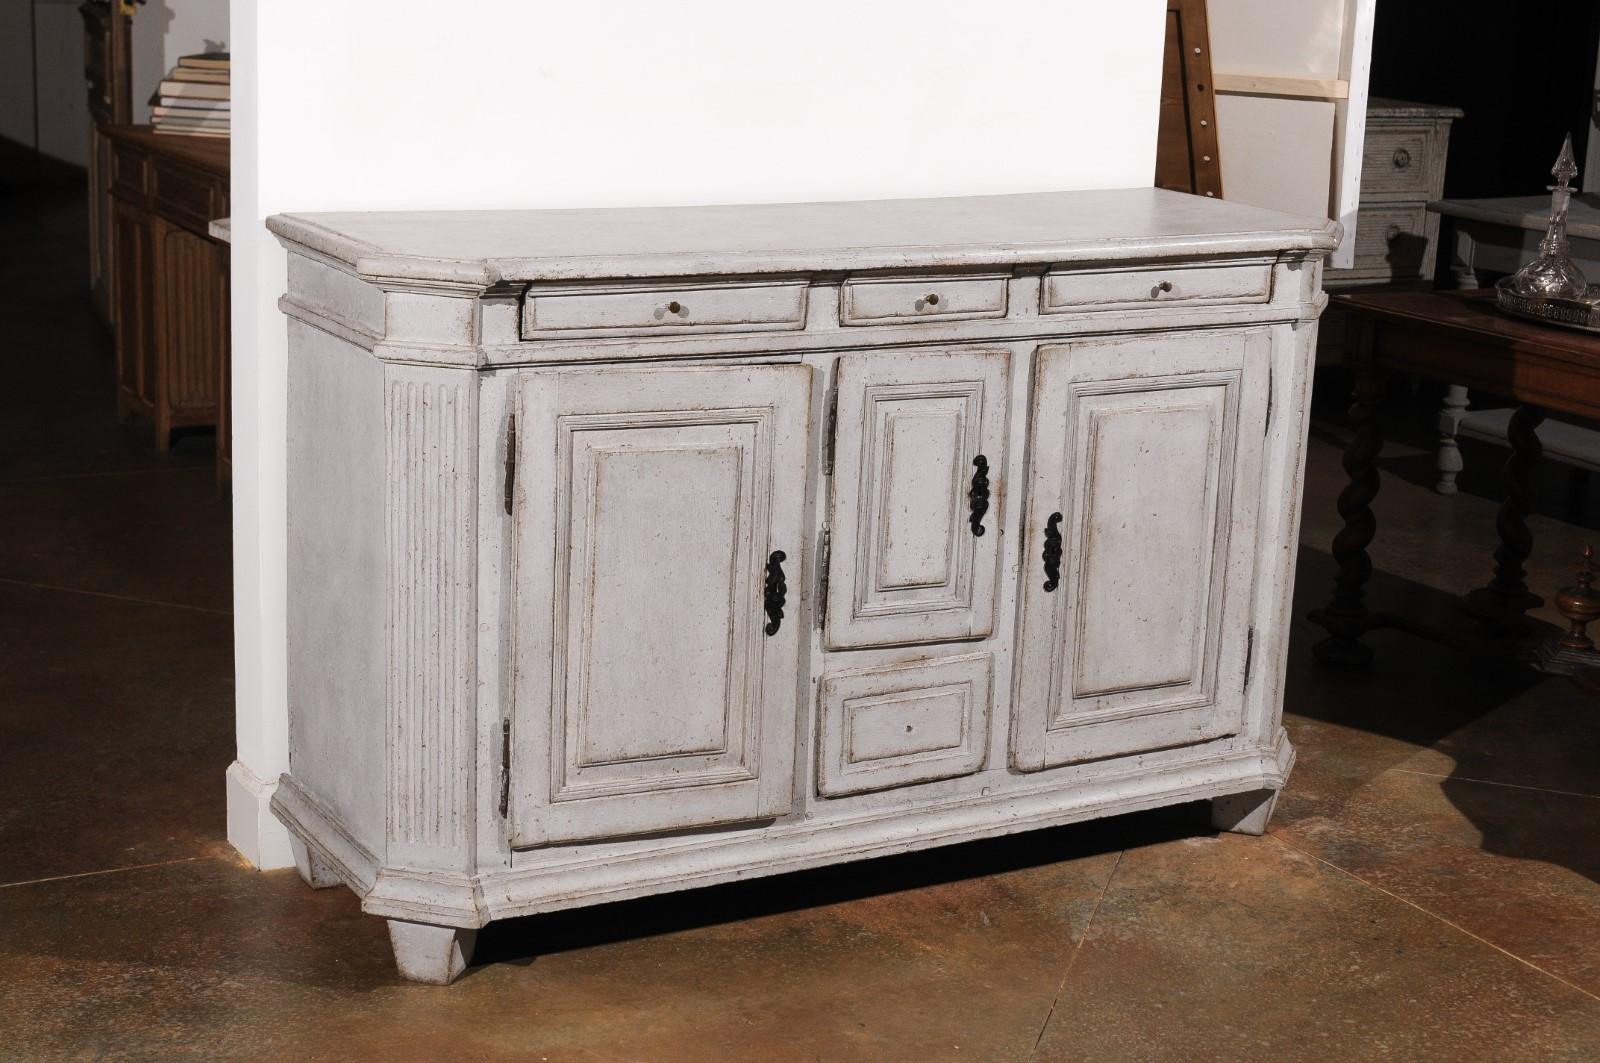 Late 18th Century Swedish Gustavian Painted Wood Sideboard with Fluted Pilasters In Good Condition For Sale In Atlanta, GA